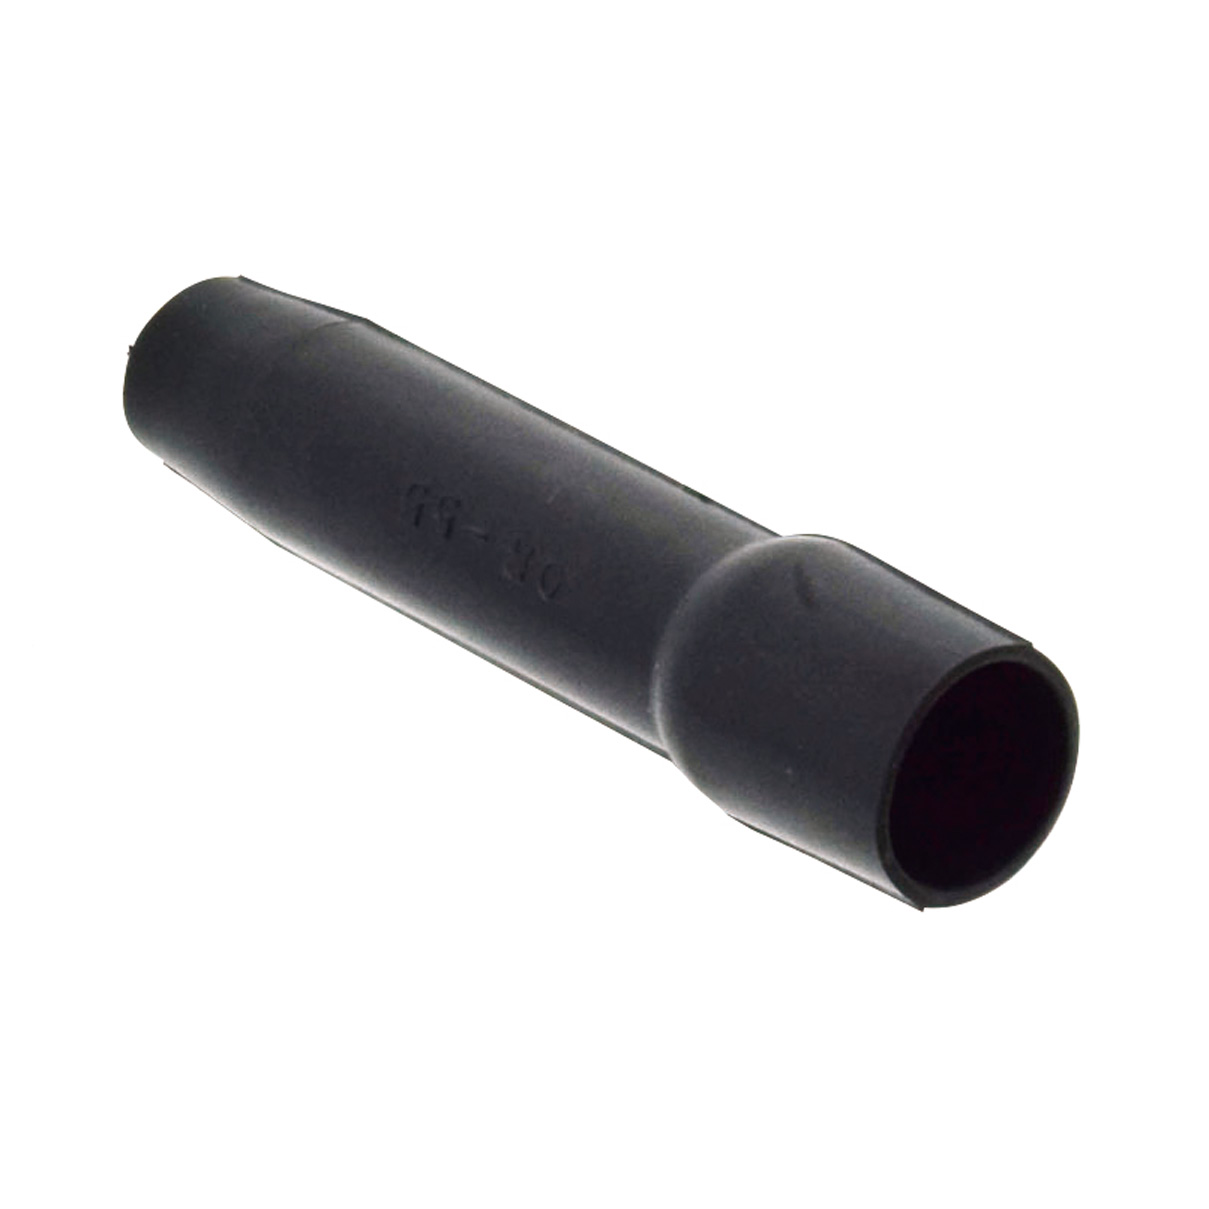 OR-55 Lamp Replacement Tool